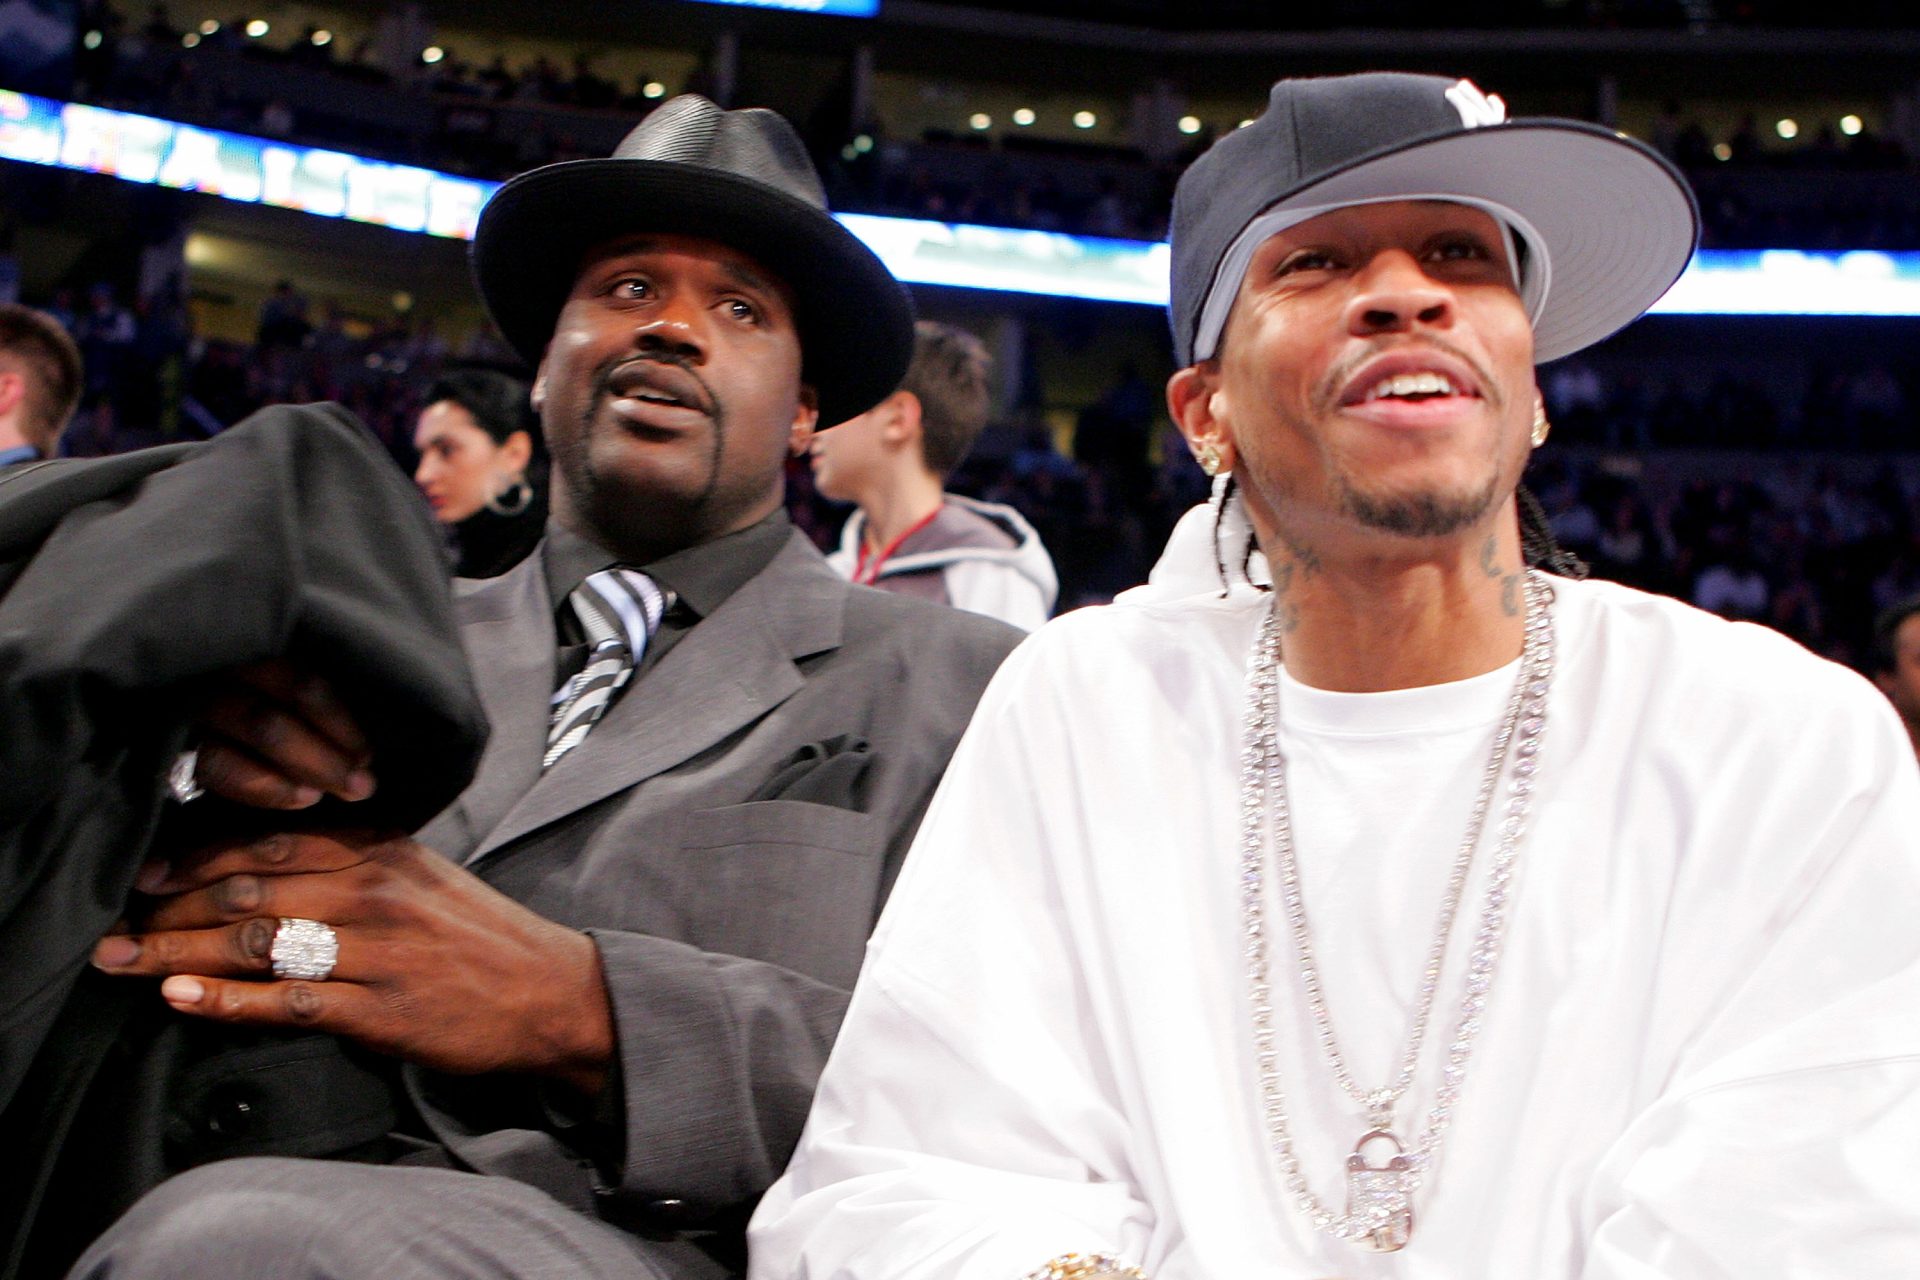 Shaquille O’Neal and Allen Iverson to head Reebok Basketball’s return to the top